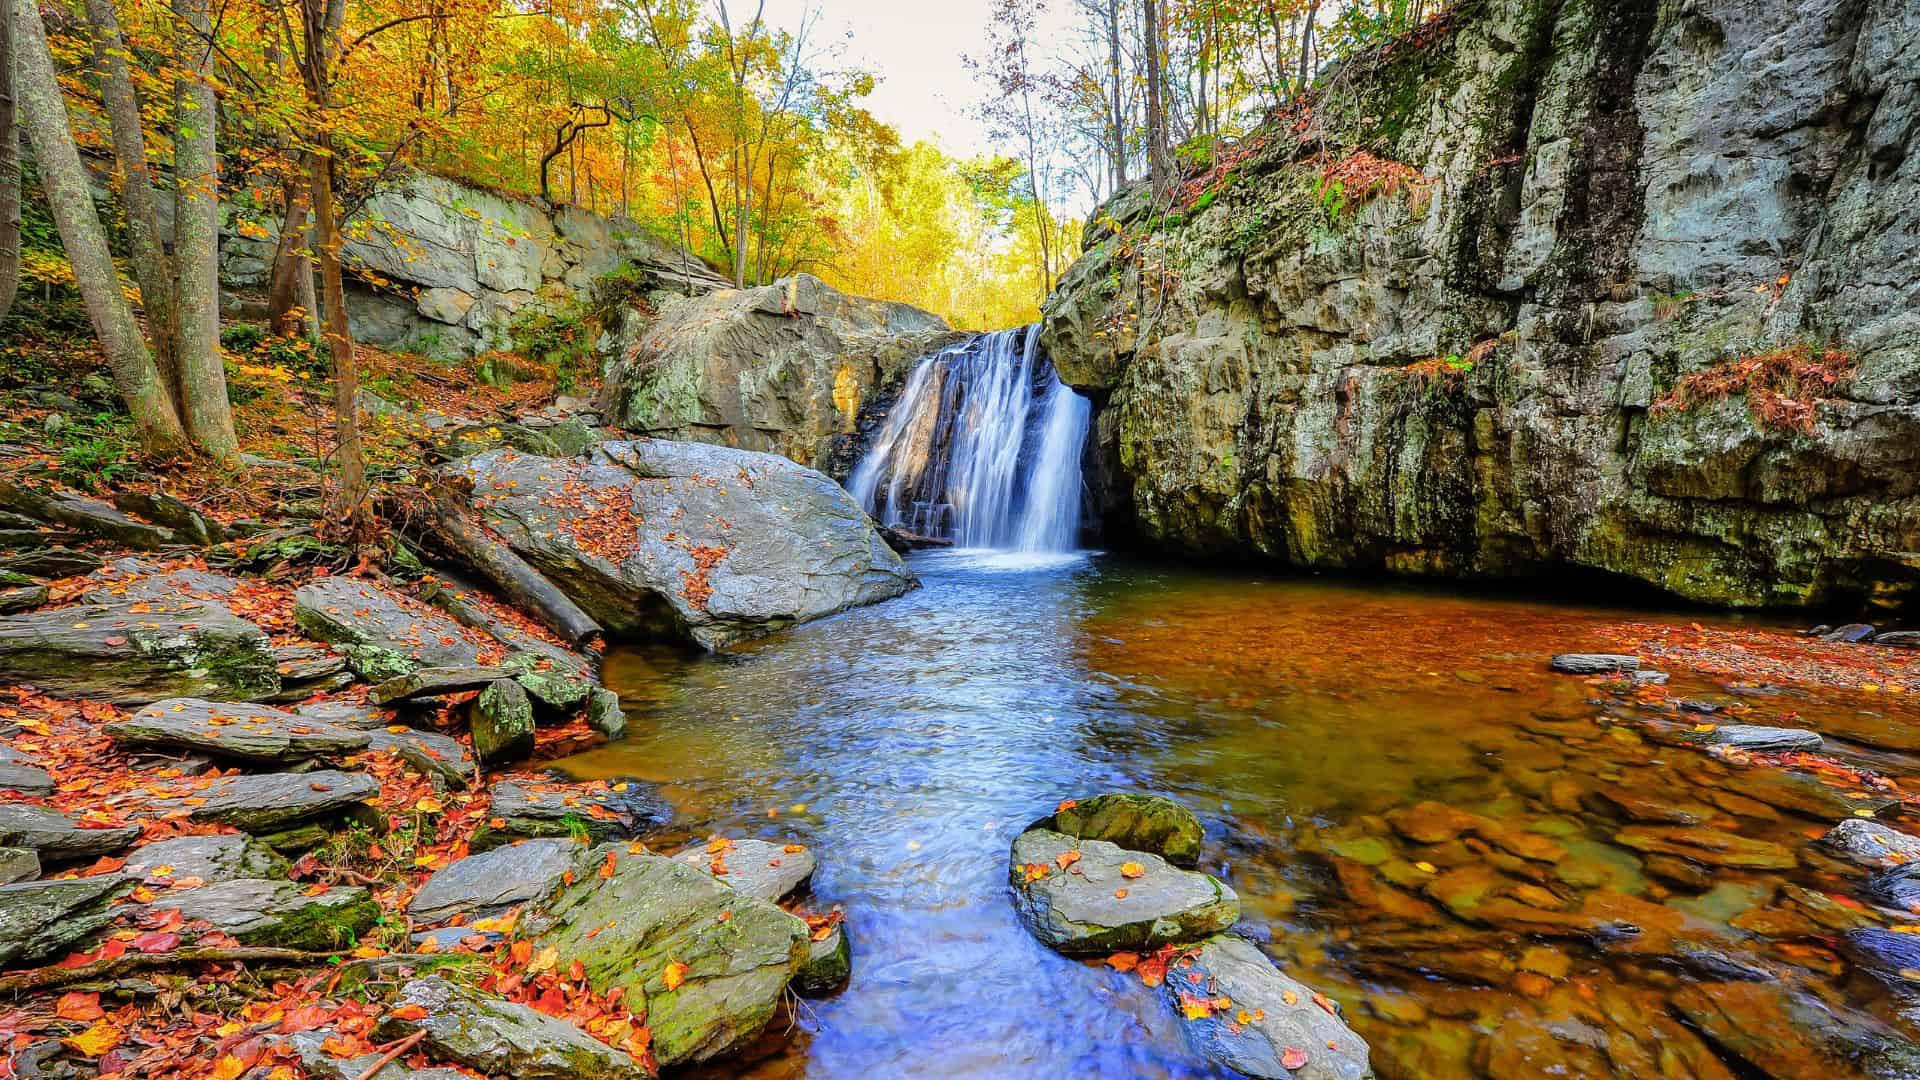 Fall Foliage in Maryland- 10 Top Places to Enjoy the Season